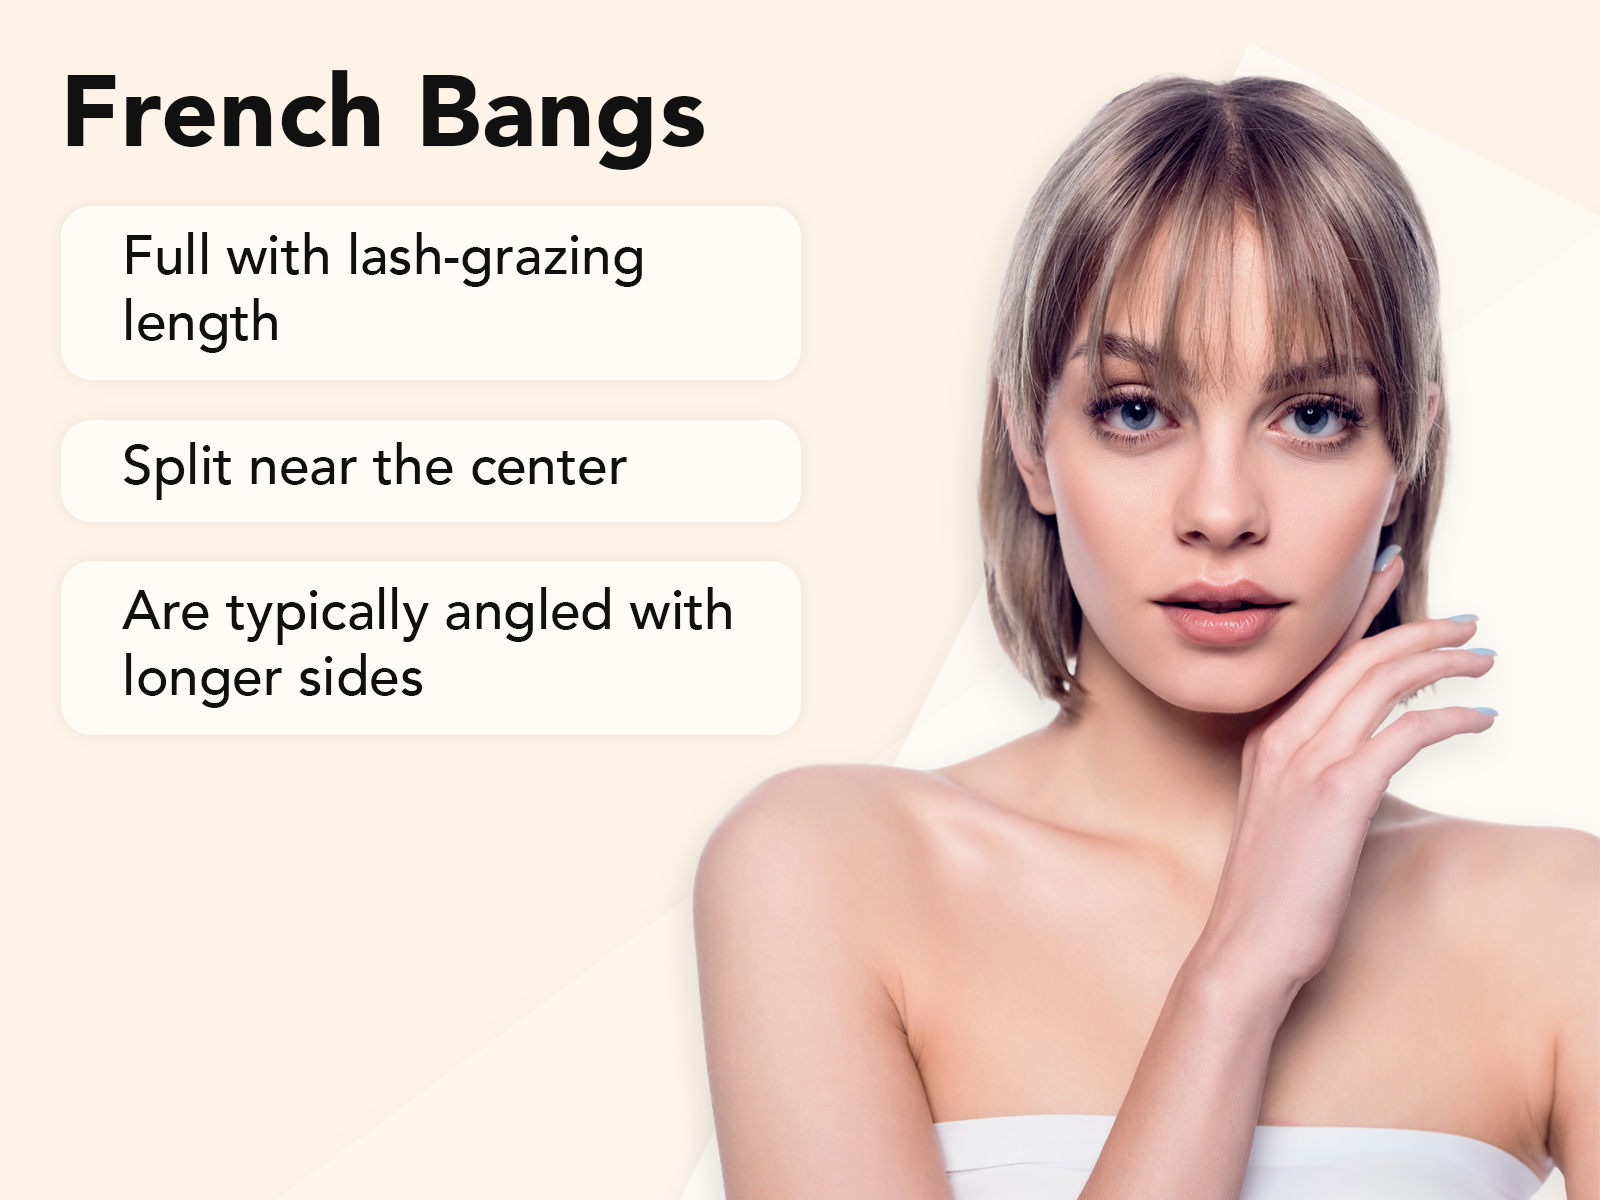 What Are French Bangs explainer image on a tan background